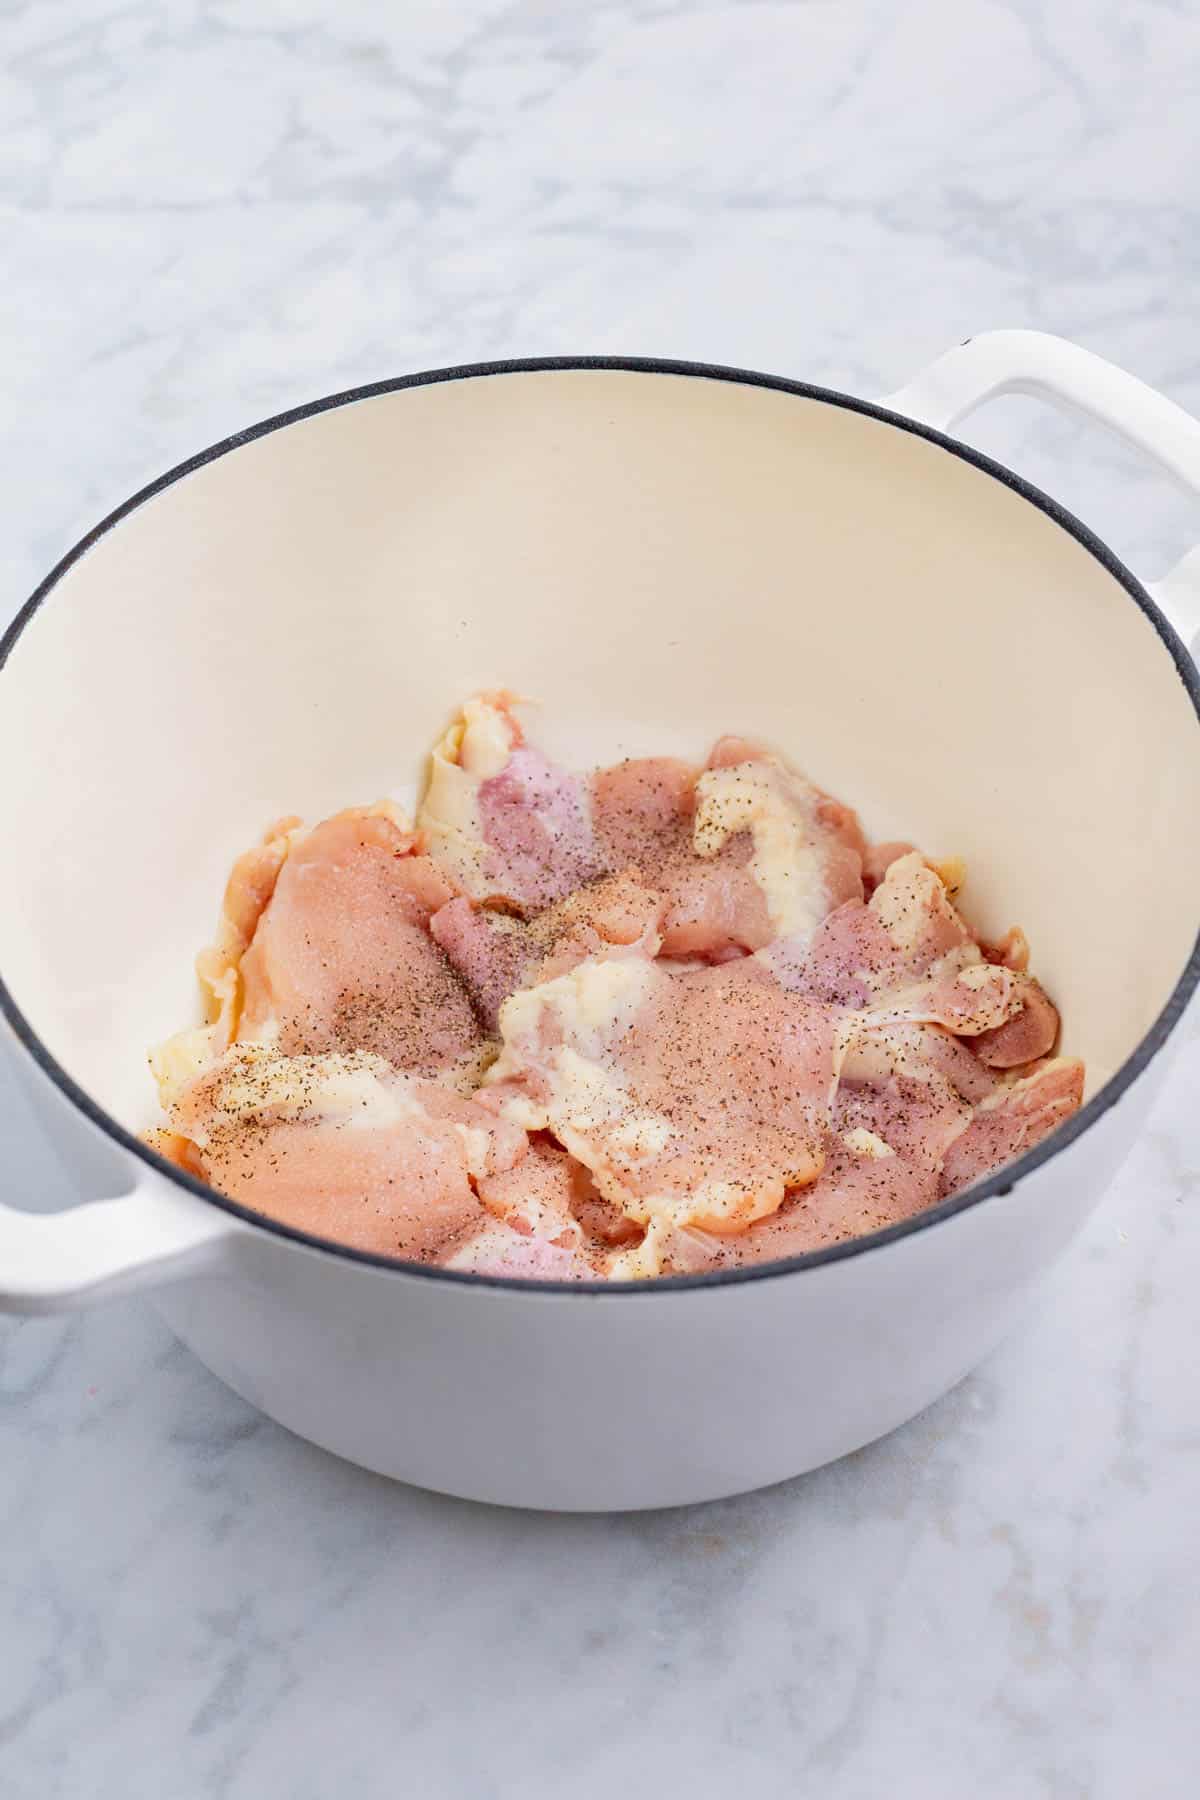 Chicken thighs are cooked in a Dutch oven.